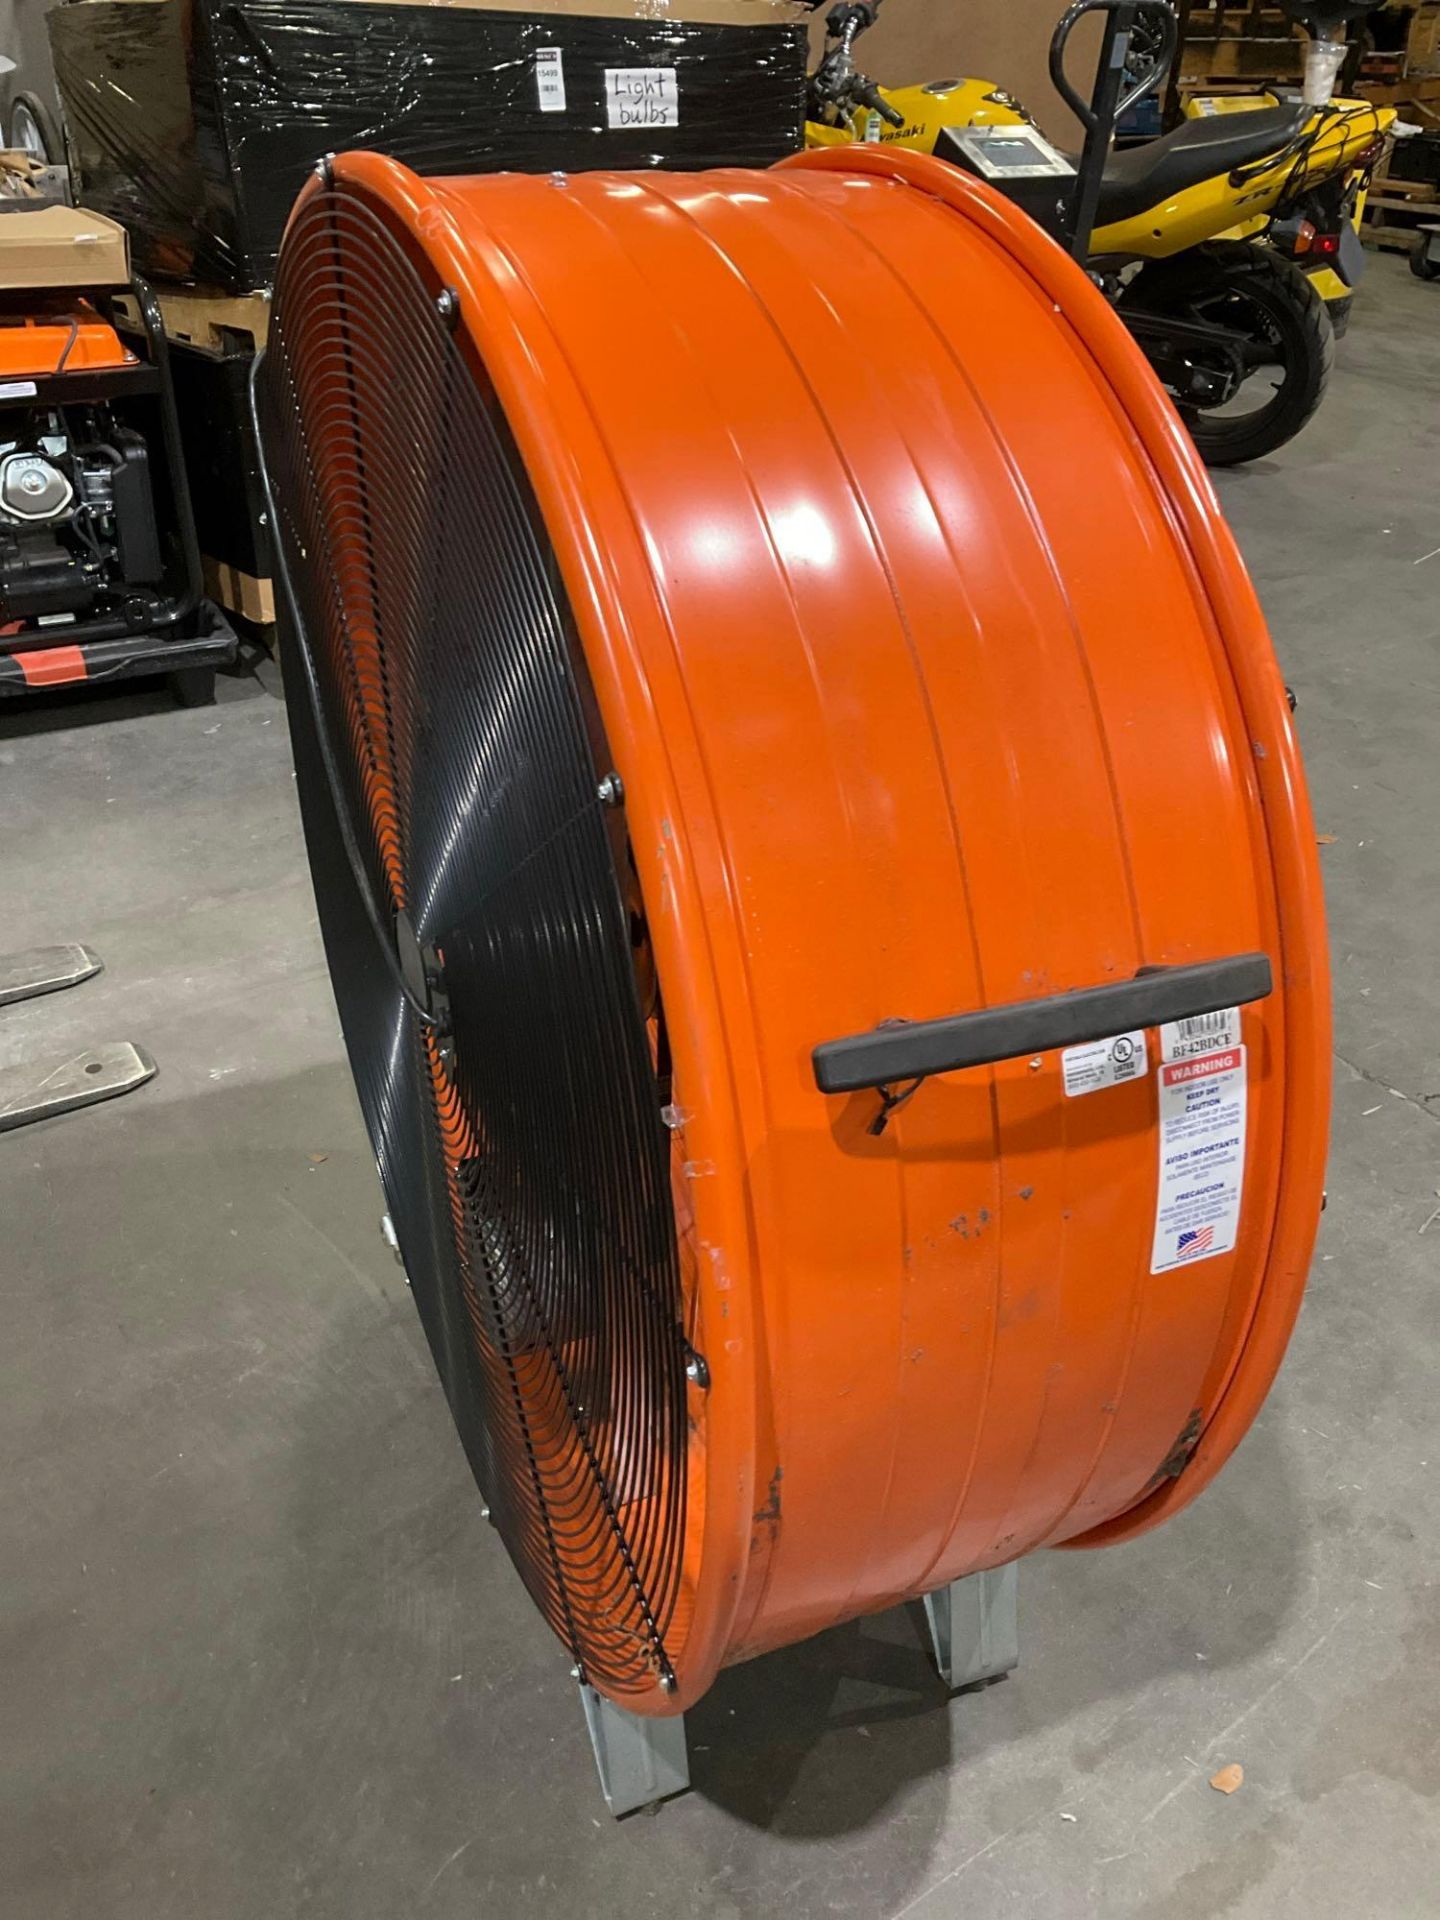 UNUSED 42" COMMERCIAL ELECTRIC PORTABLE BARREL FAN - Image 5 of 8